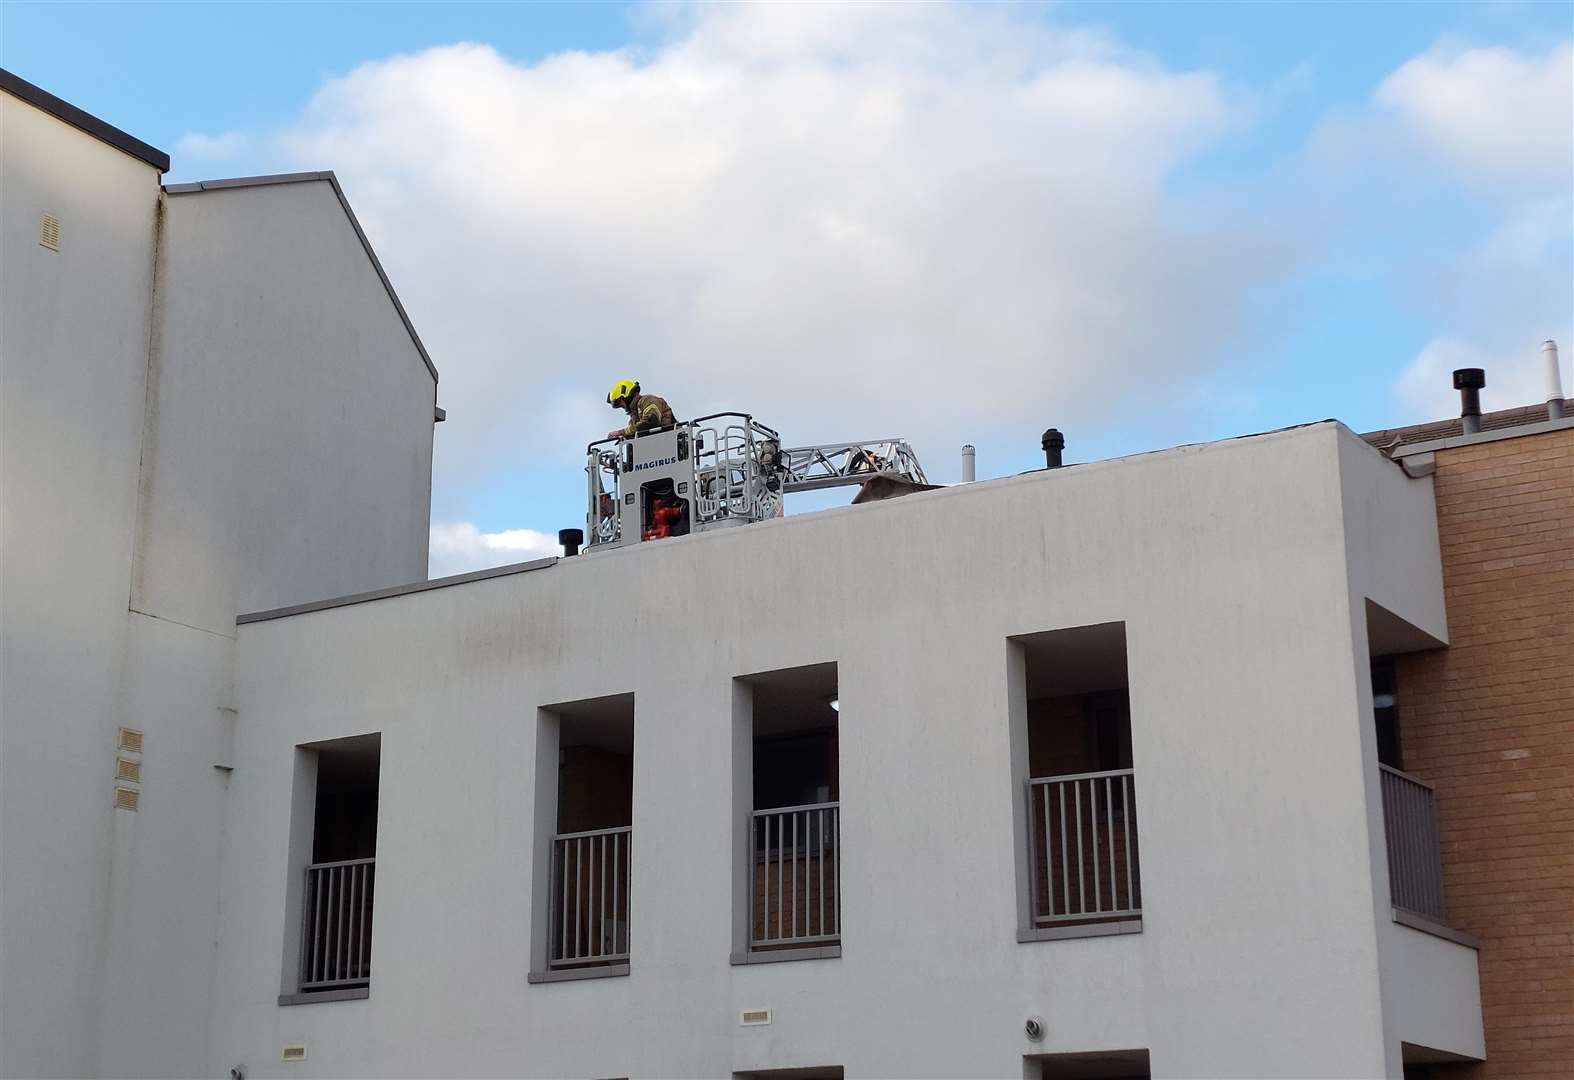 A firefighter removes tiles from the roof of Bakers Court on Friday